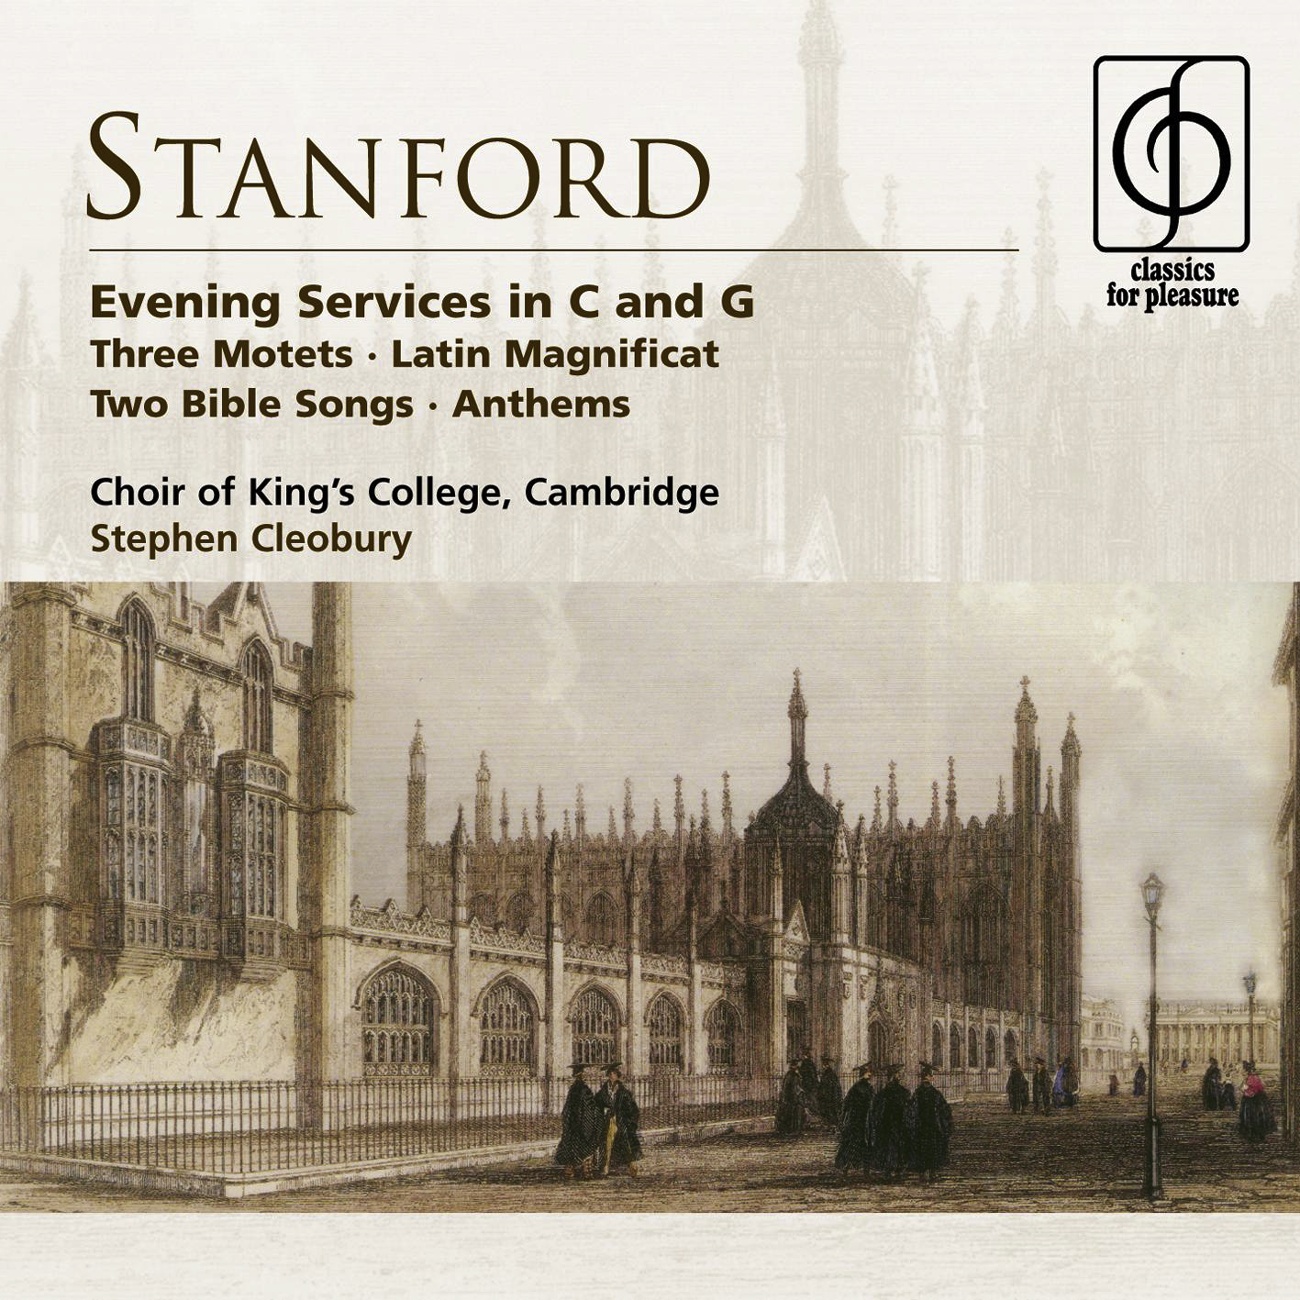 Six Short Preludes and Postludes - Set 2 Op. 105: Postlude in D minor (Allegro) Op. 105 No. 6